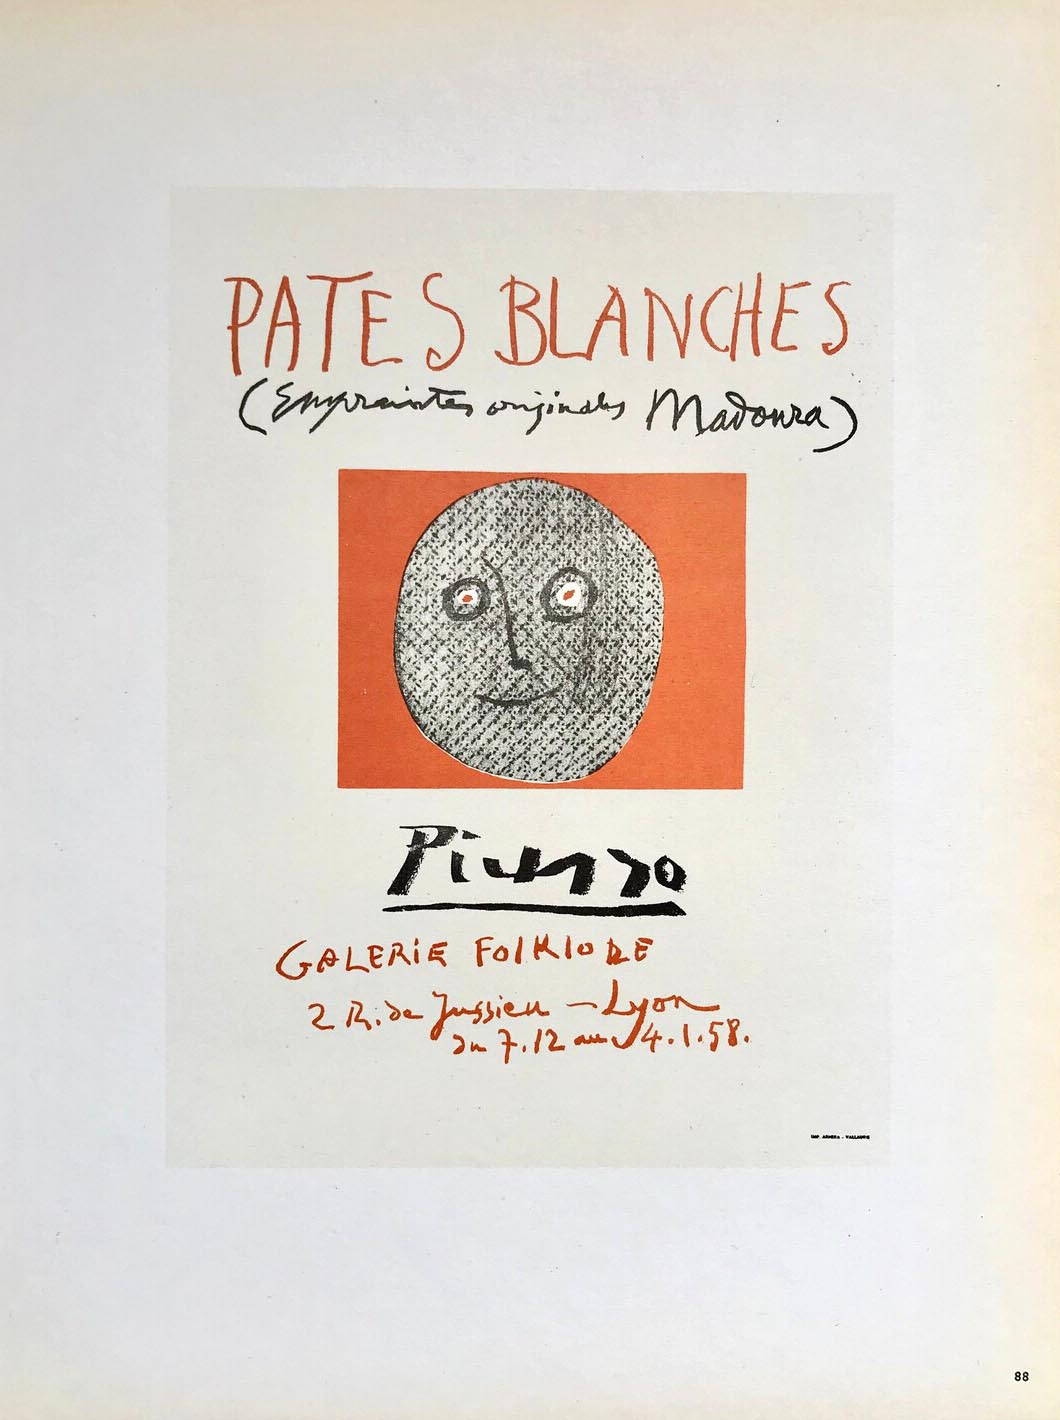 Picasso Poster Pates blanches